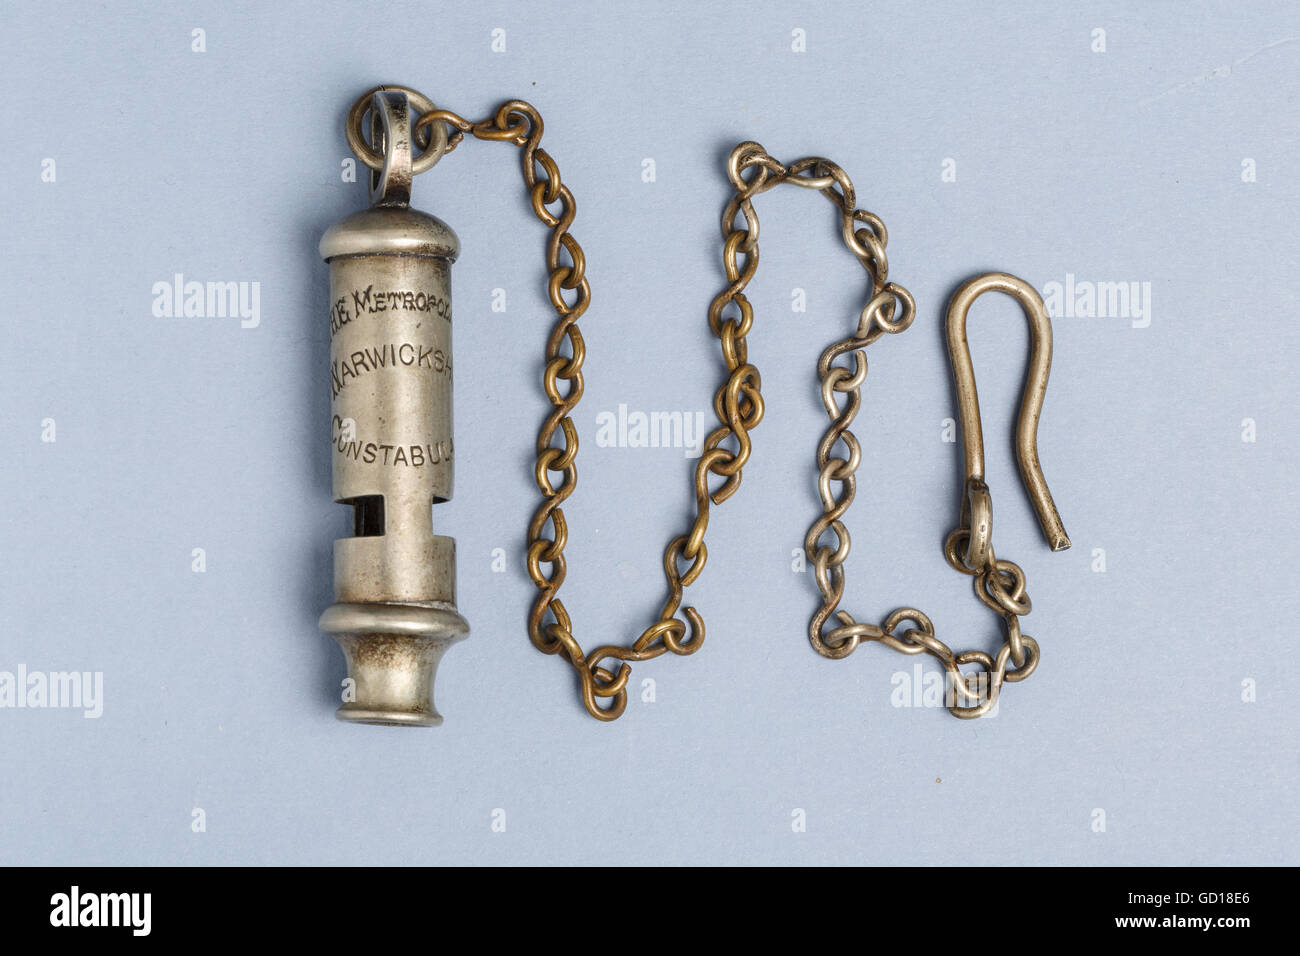 Police whistle, Warwickshire Constabulary, made by Hudson and Sons. Birmingham, with chain Stock Photo